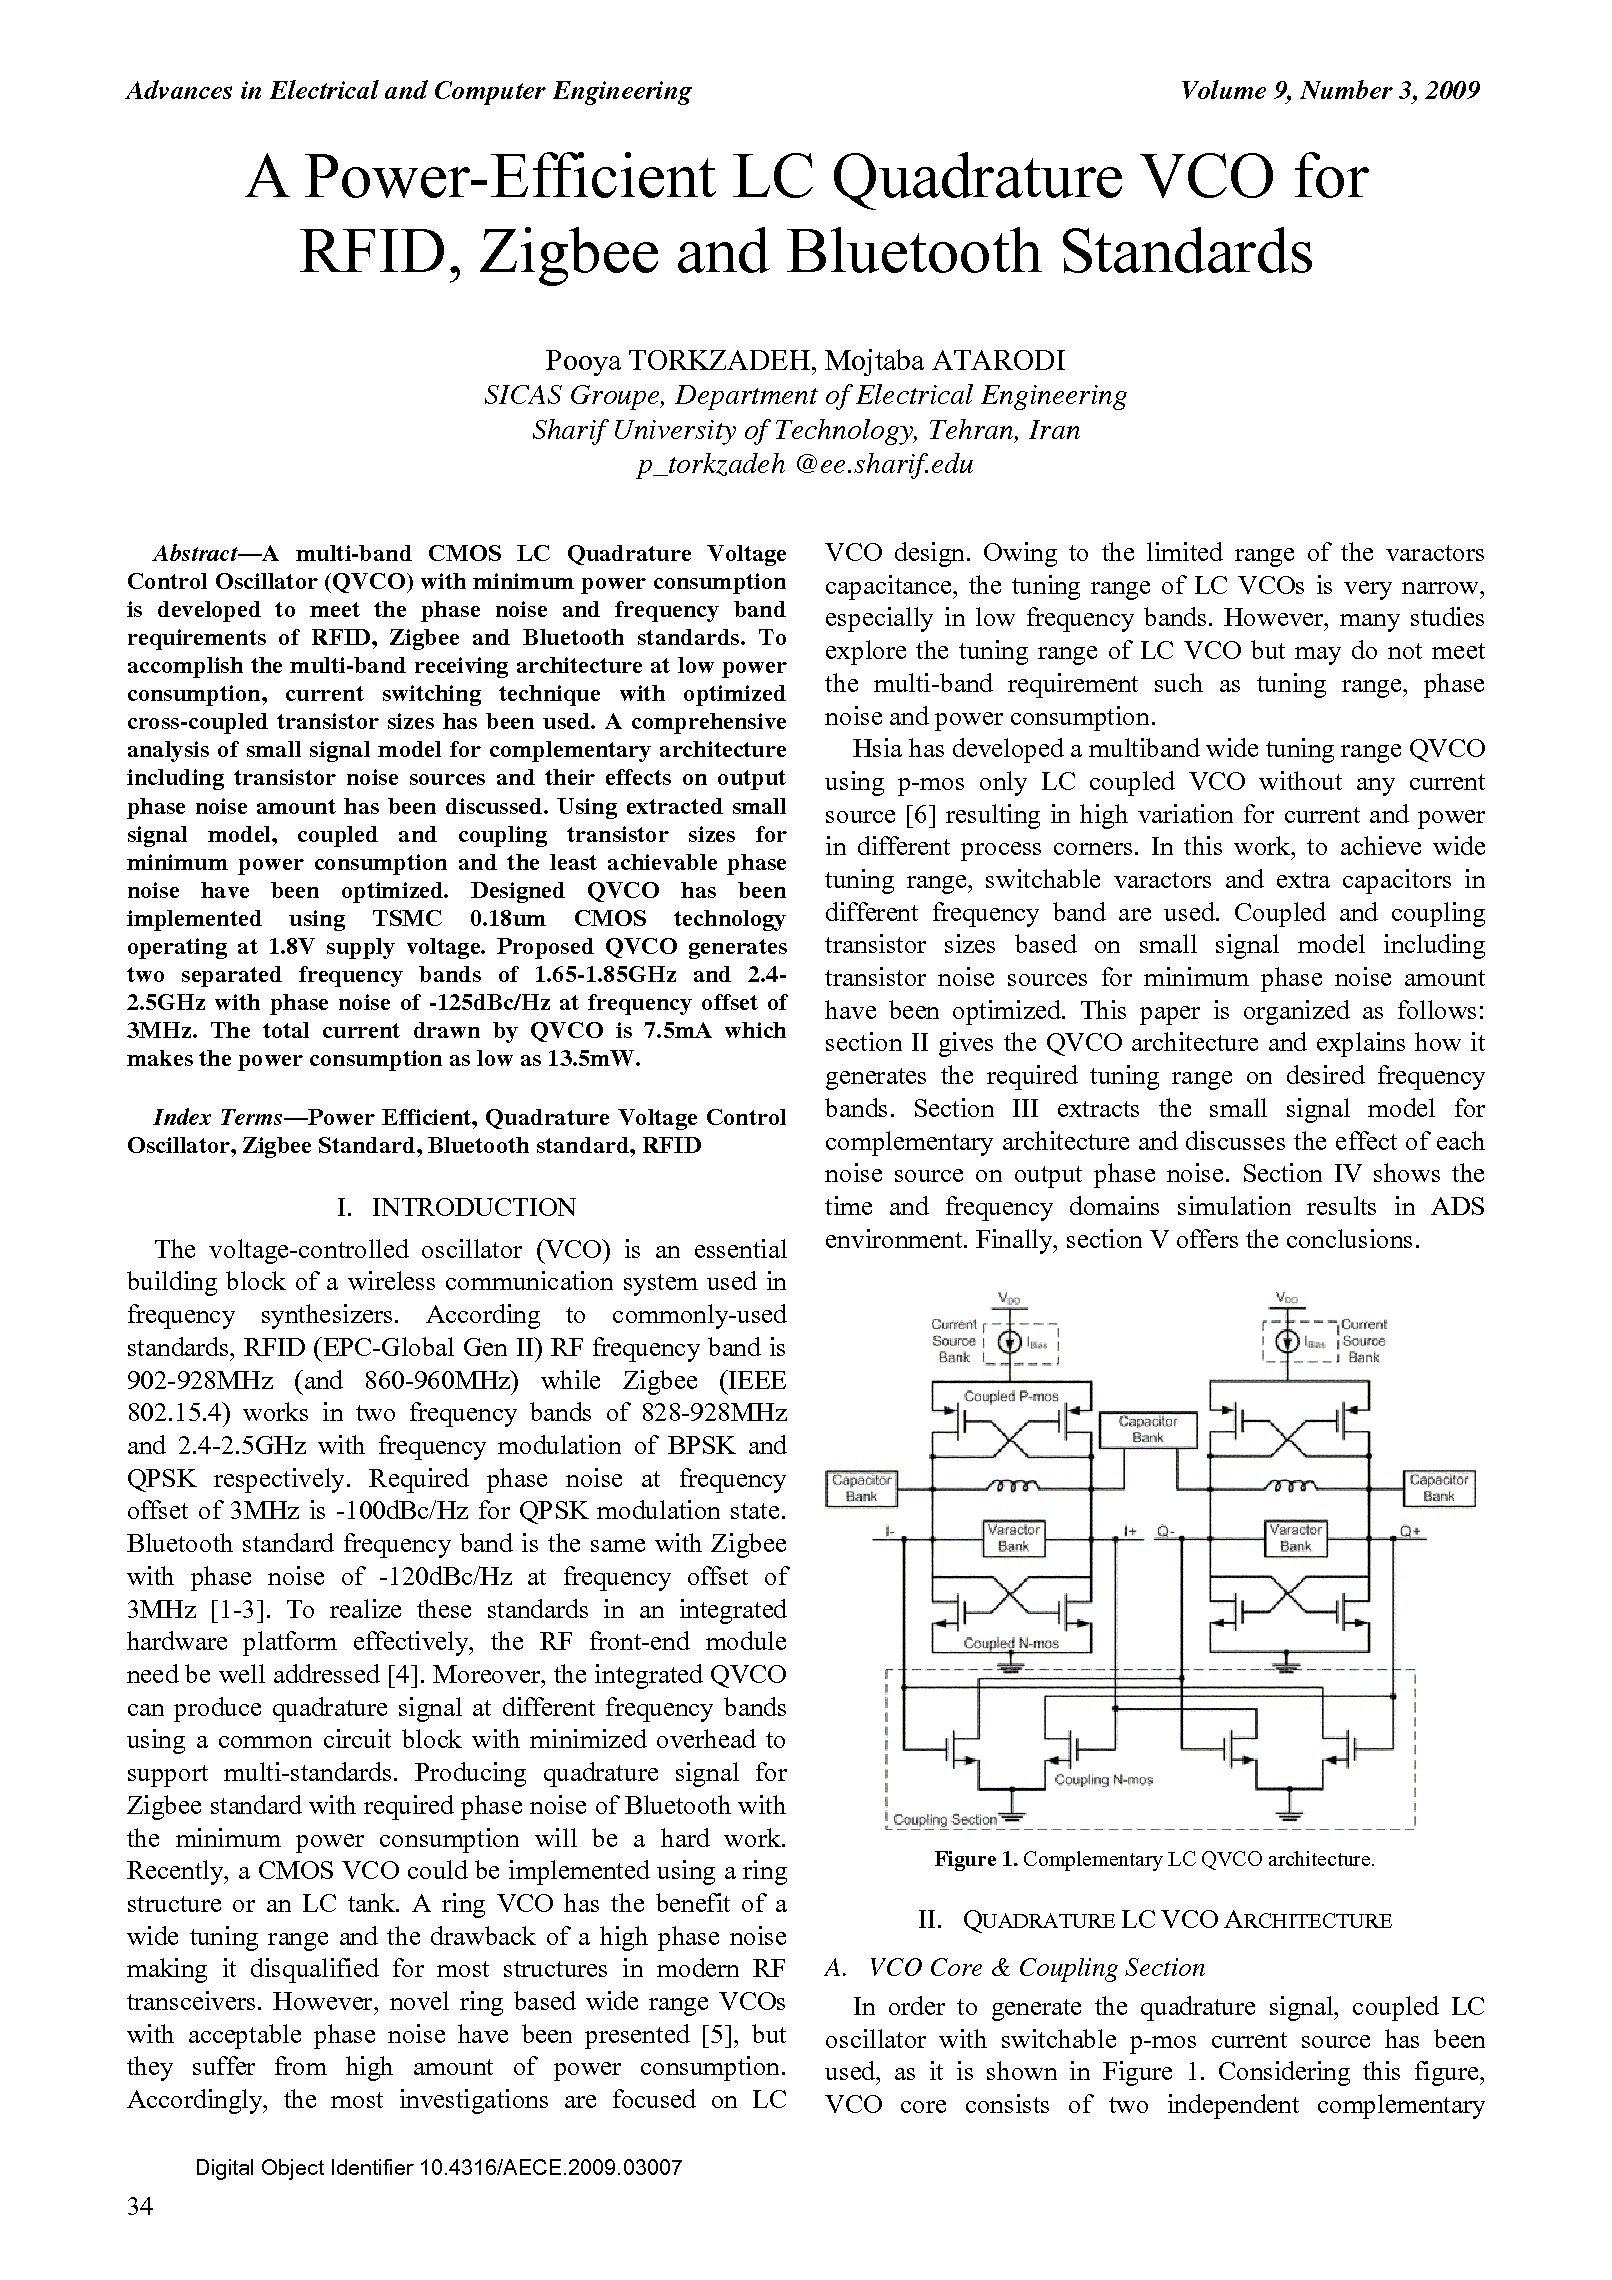 PDF Quickview for paper with DOI:10.4316/AECE.2009.03007